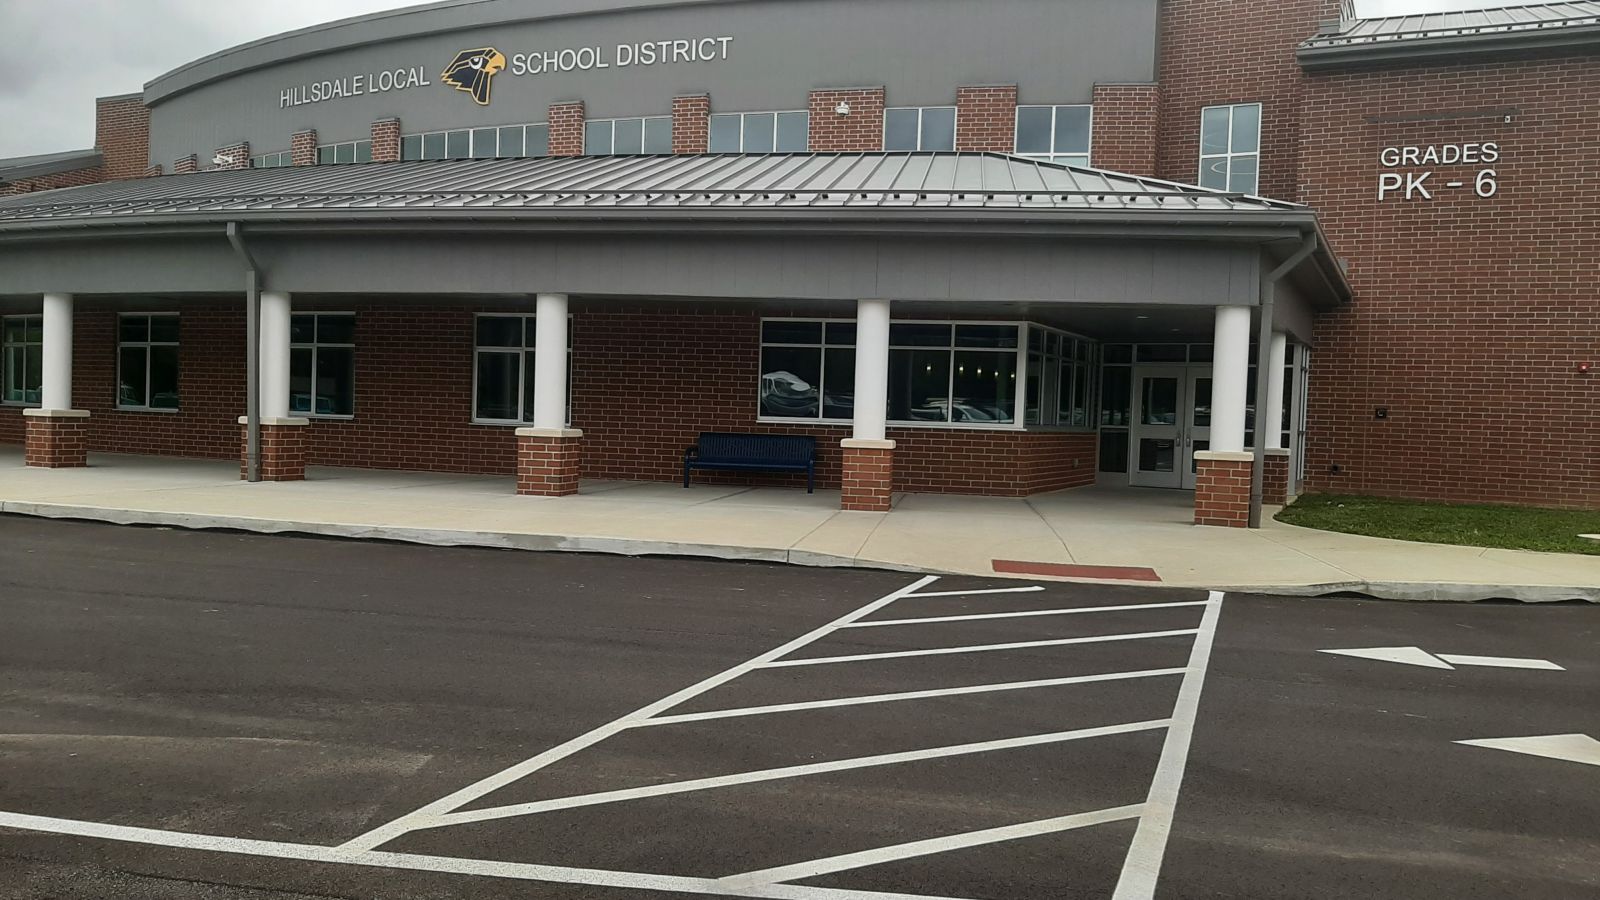 An image of the PK-6 side of the building with the crosswalk painted on the parking lot surface.